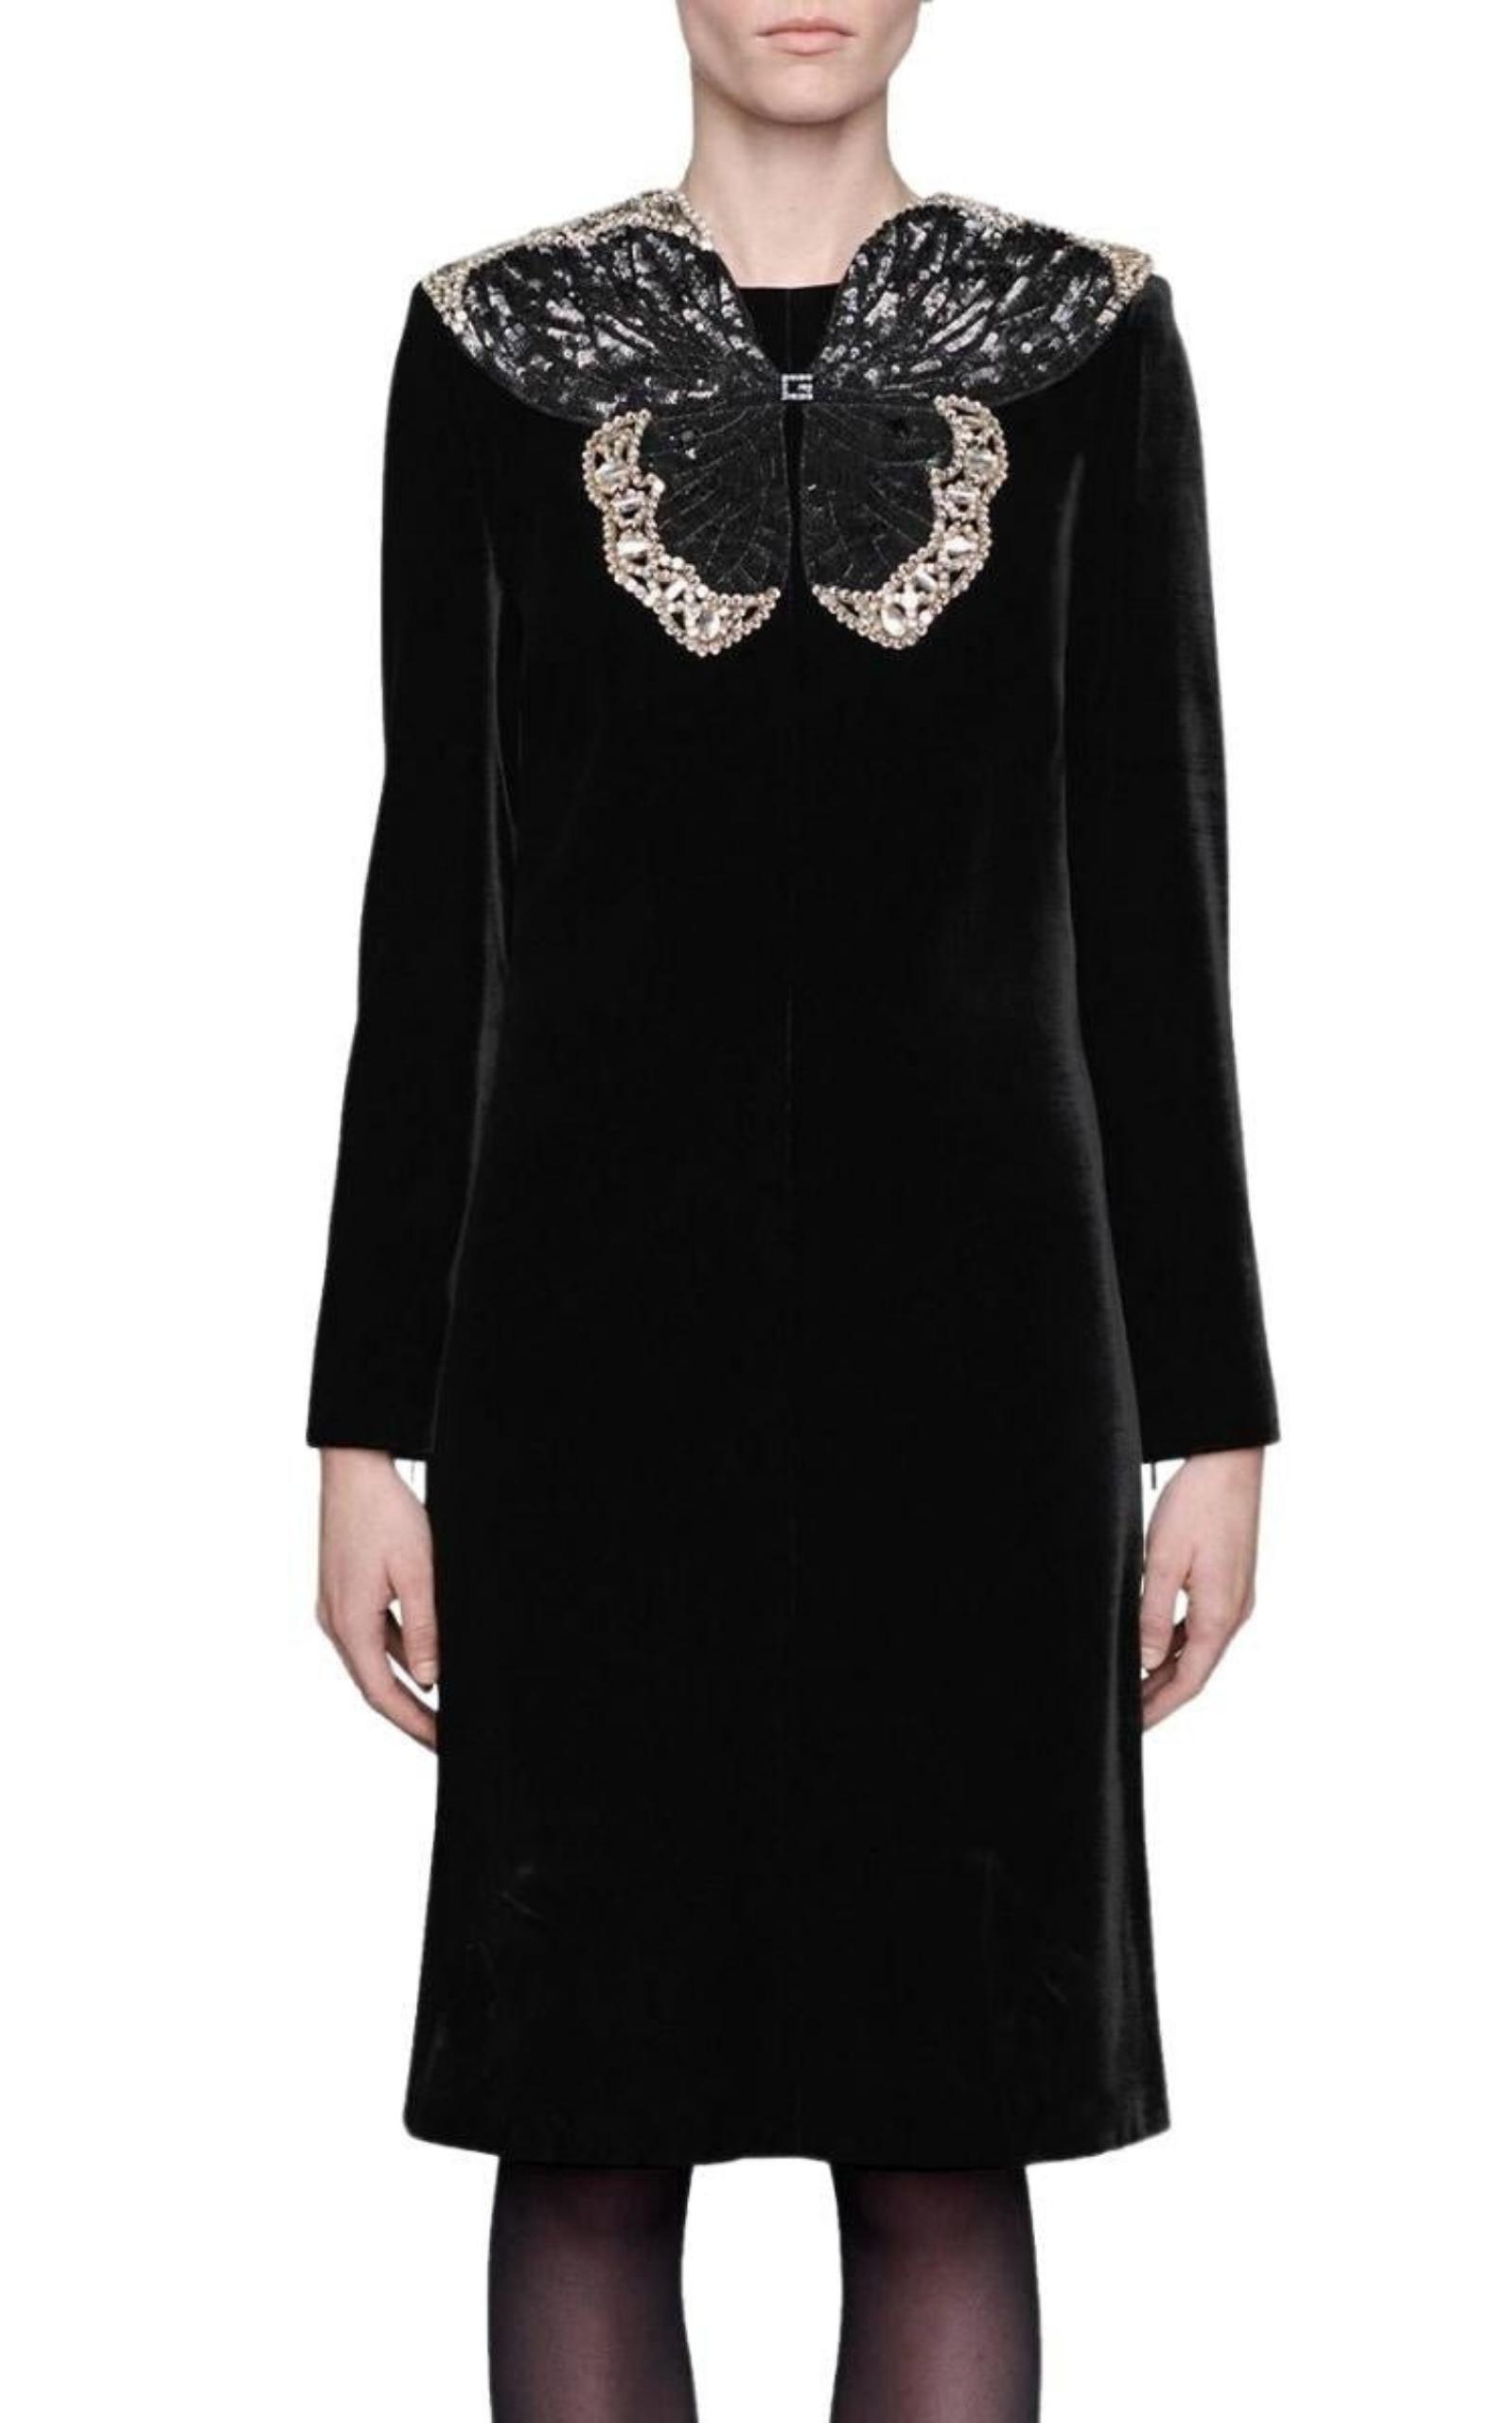  GucciCrystal And Sequinned Butterfly Velvet Dress - Runway Catalog